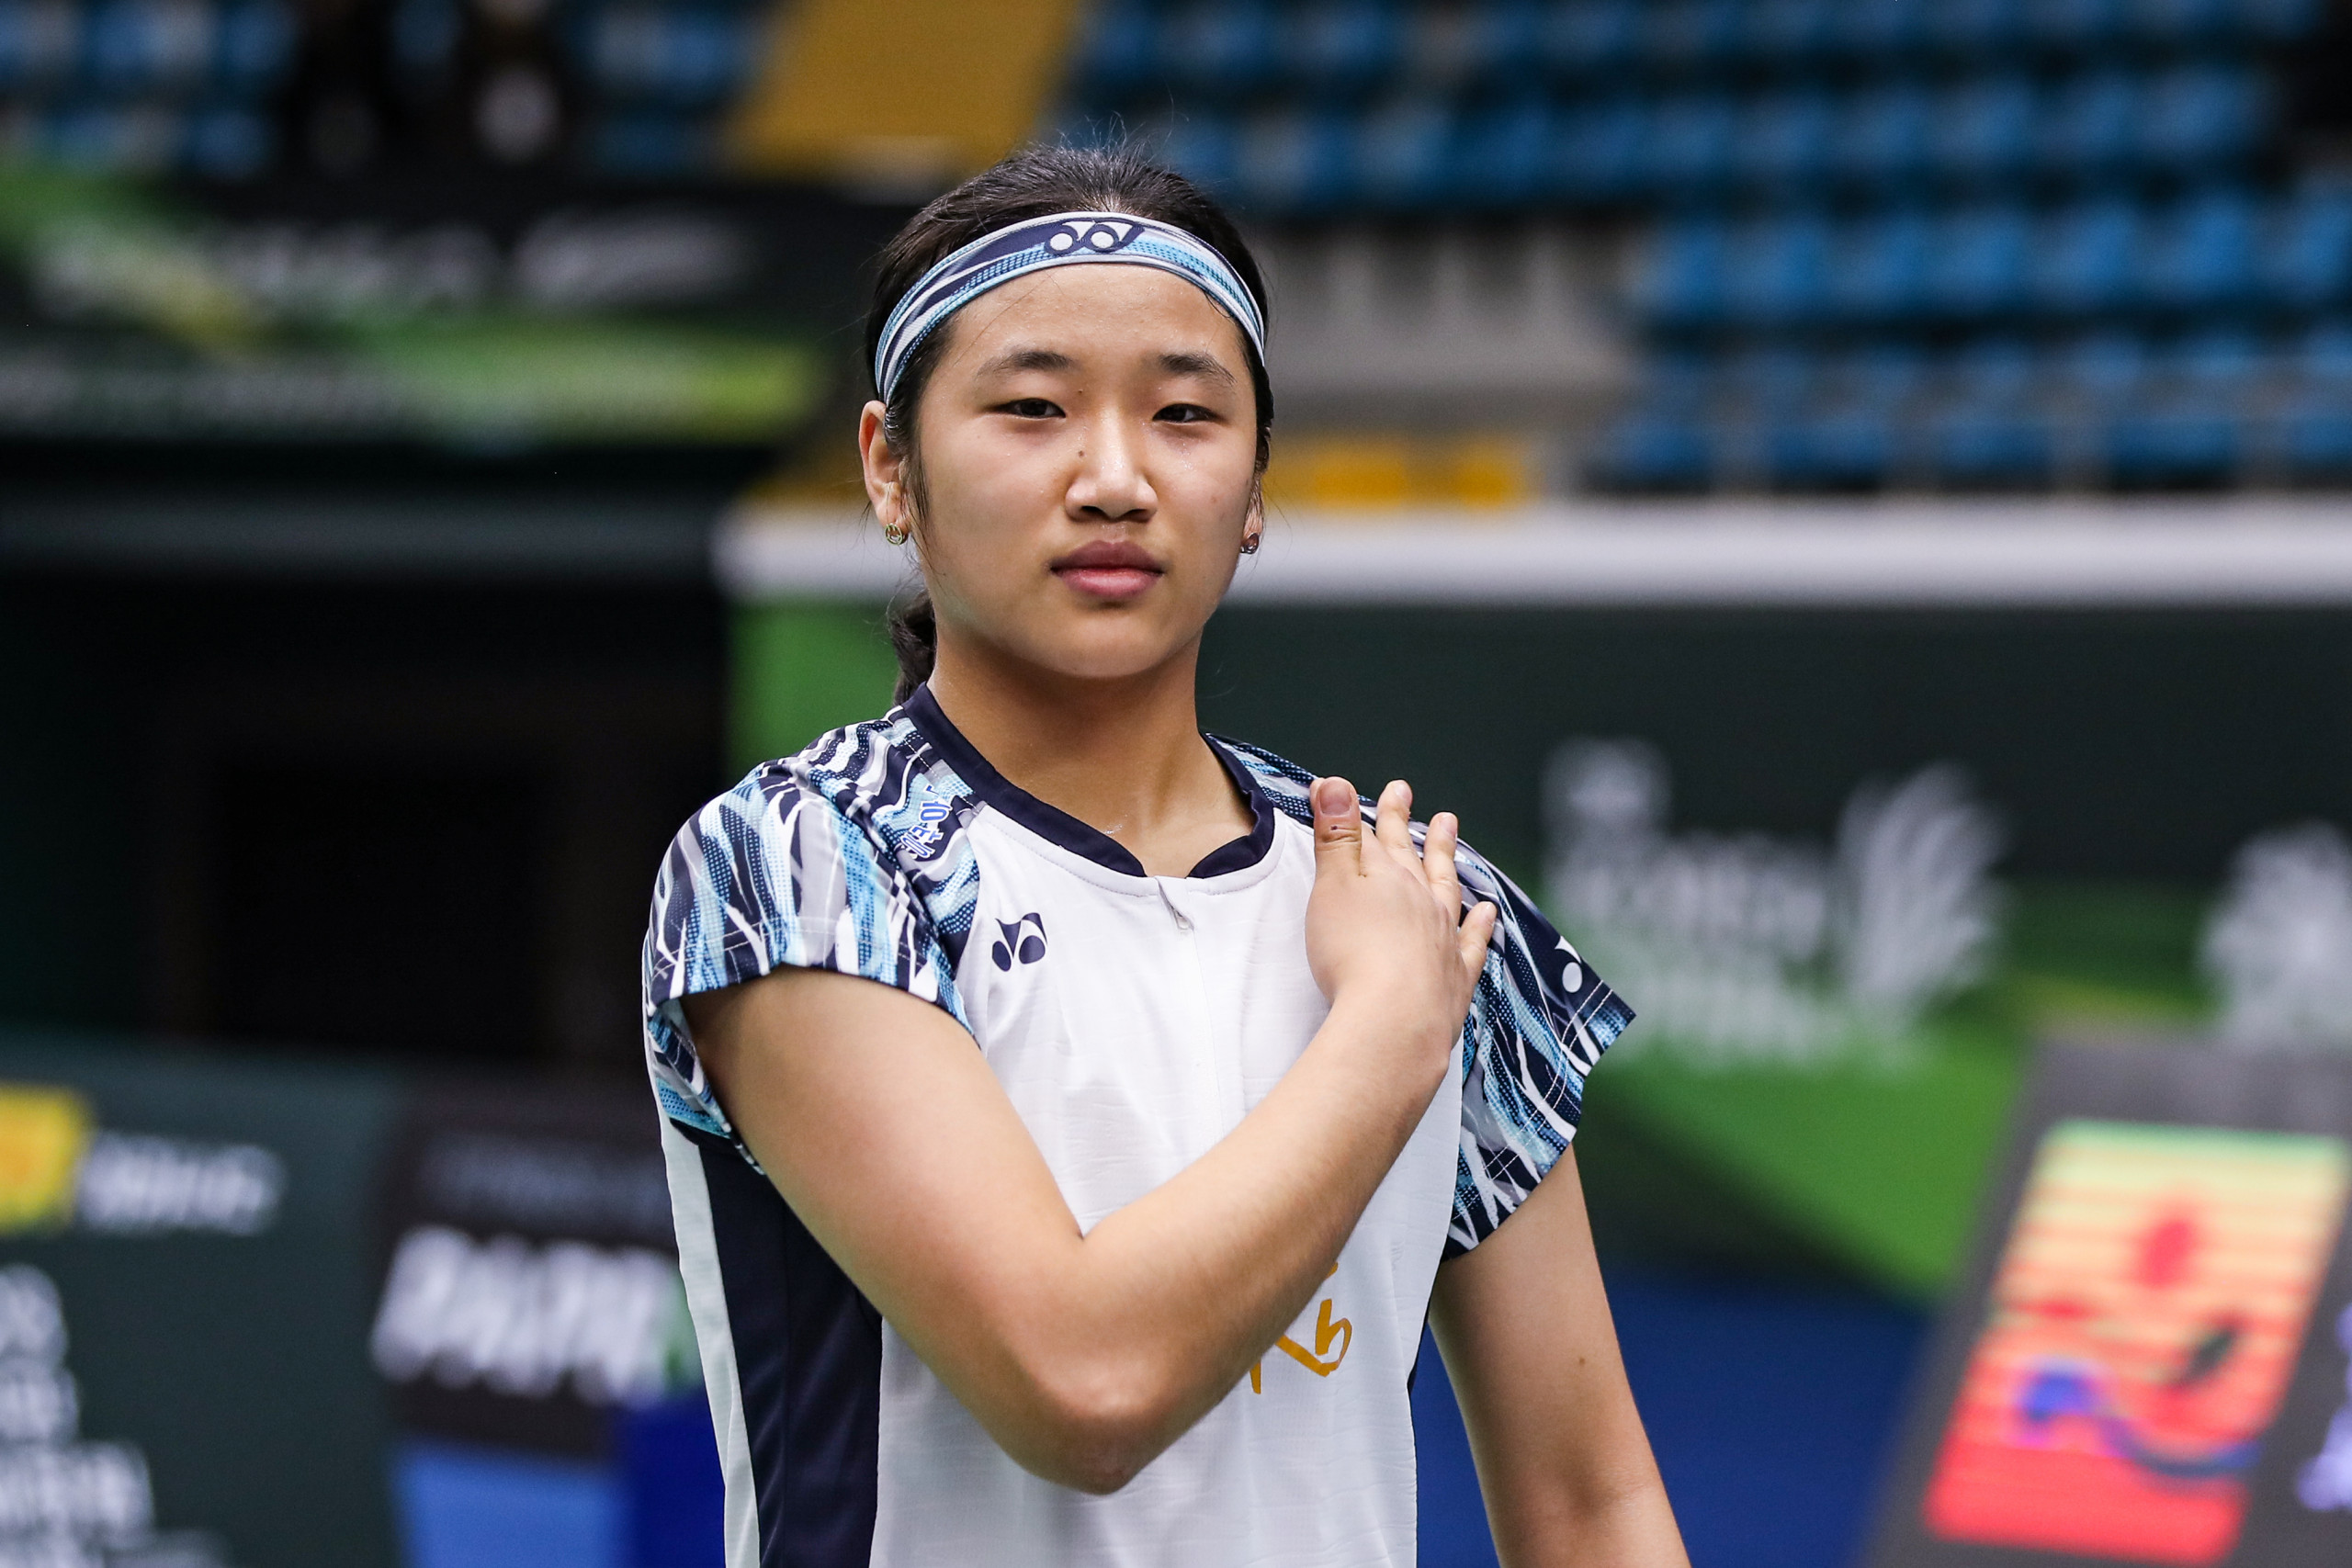 Korea’s campaign will depend on An Se Young’s form.